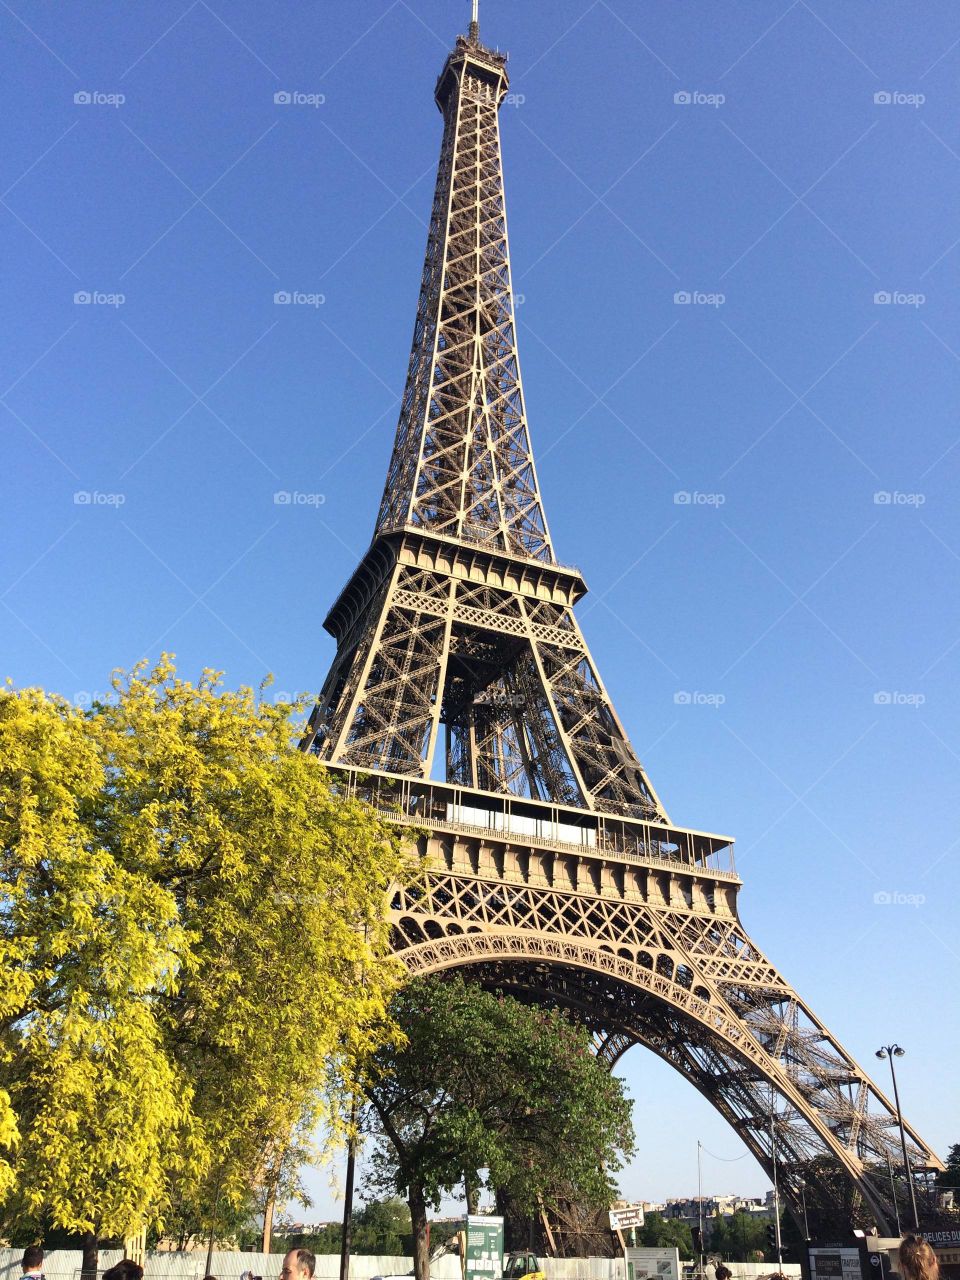 Eiffel Tower is one of the most visiting places.
Every year more than 10 million people visit here...